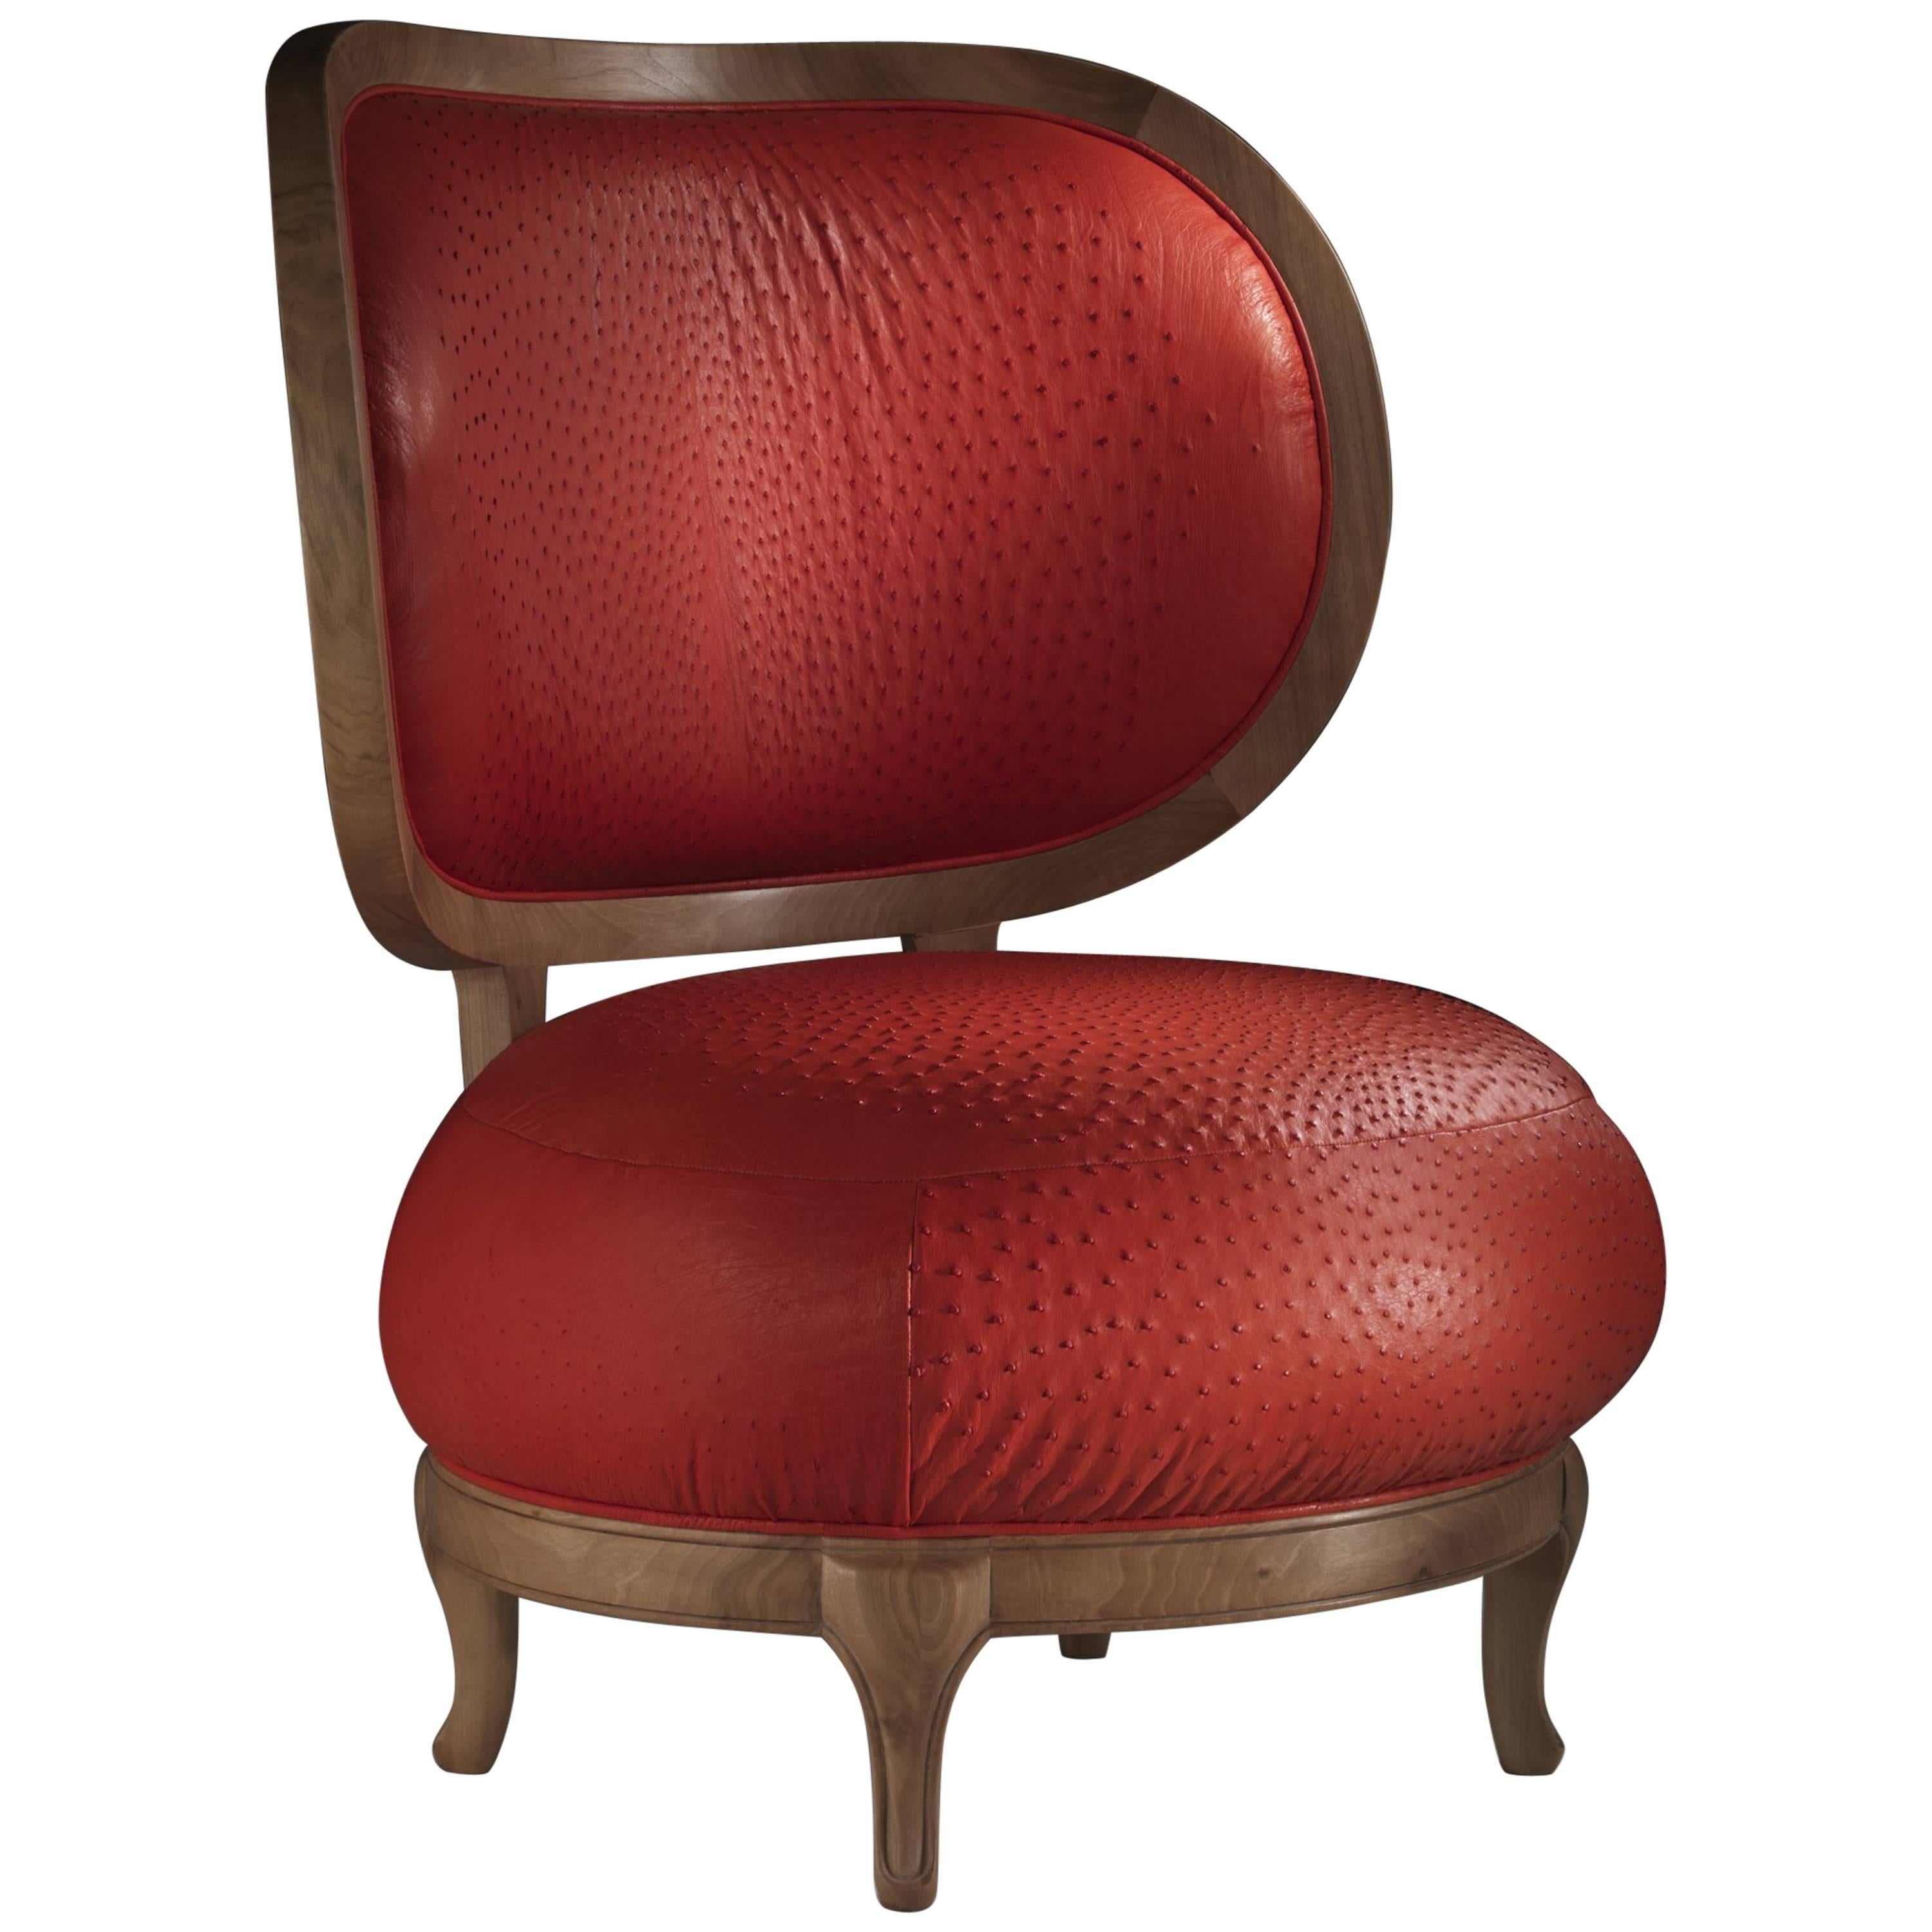 Struzza - armchair in ostrich leather, designed by Nigel Coates For Sale